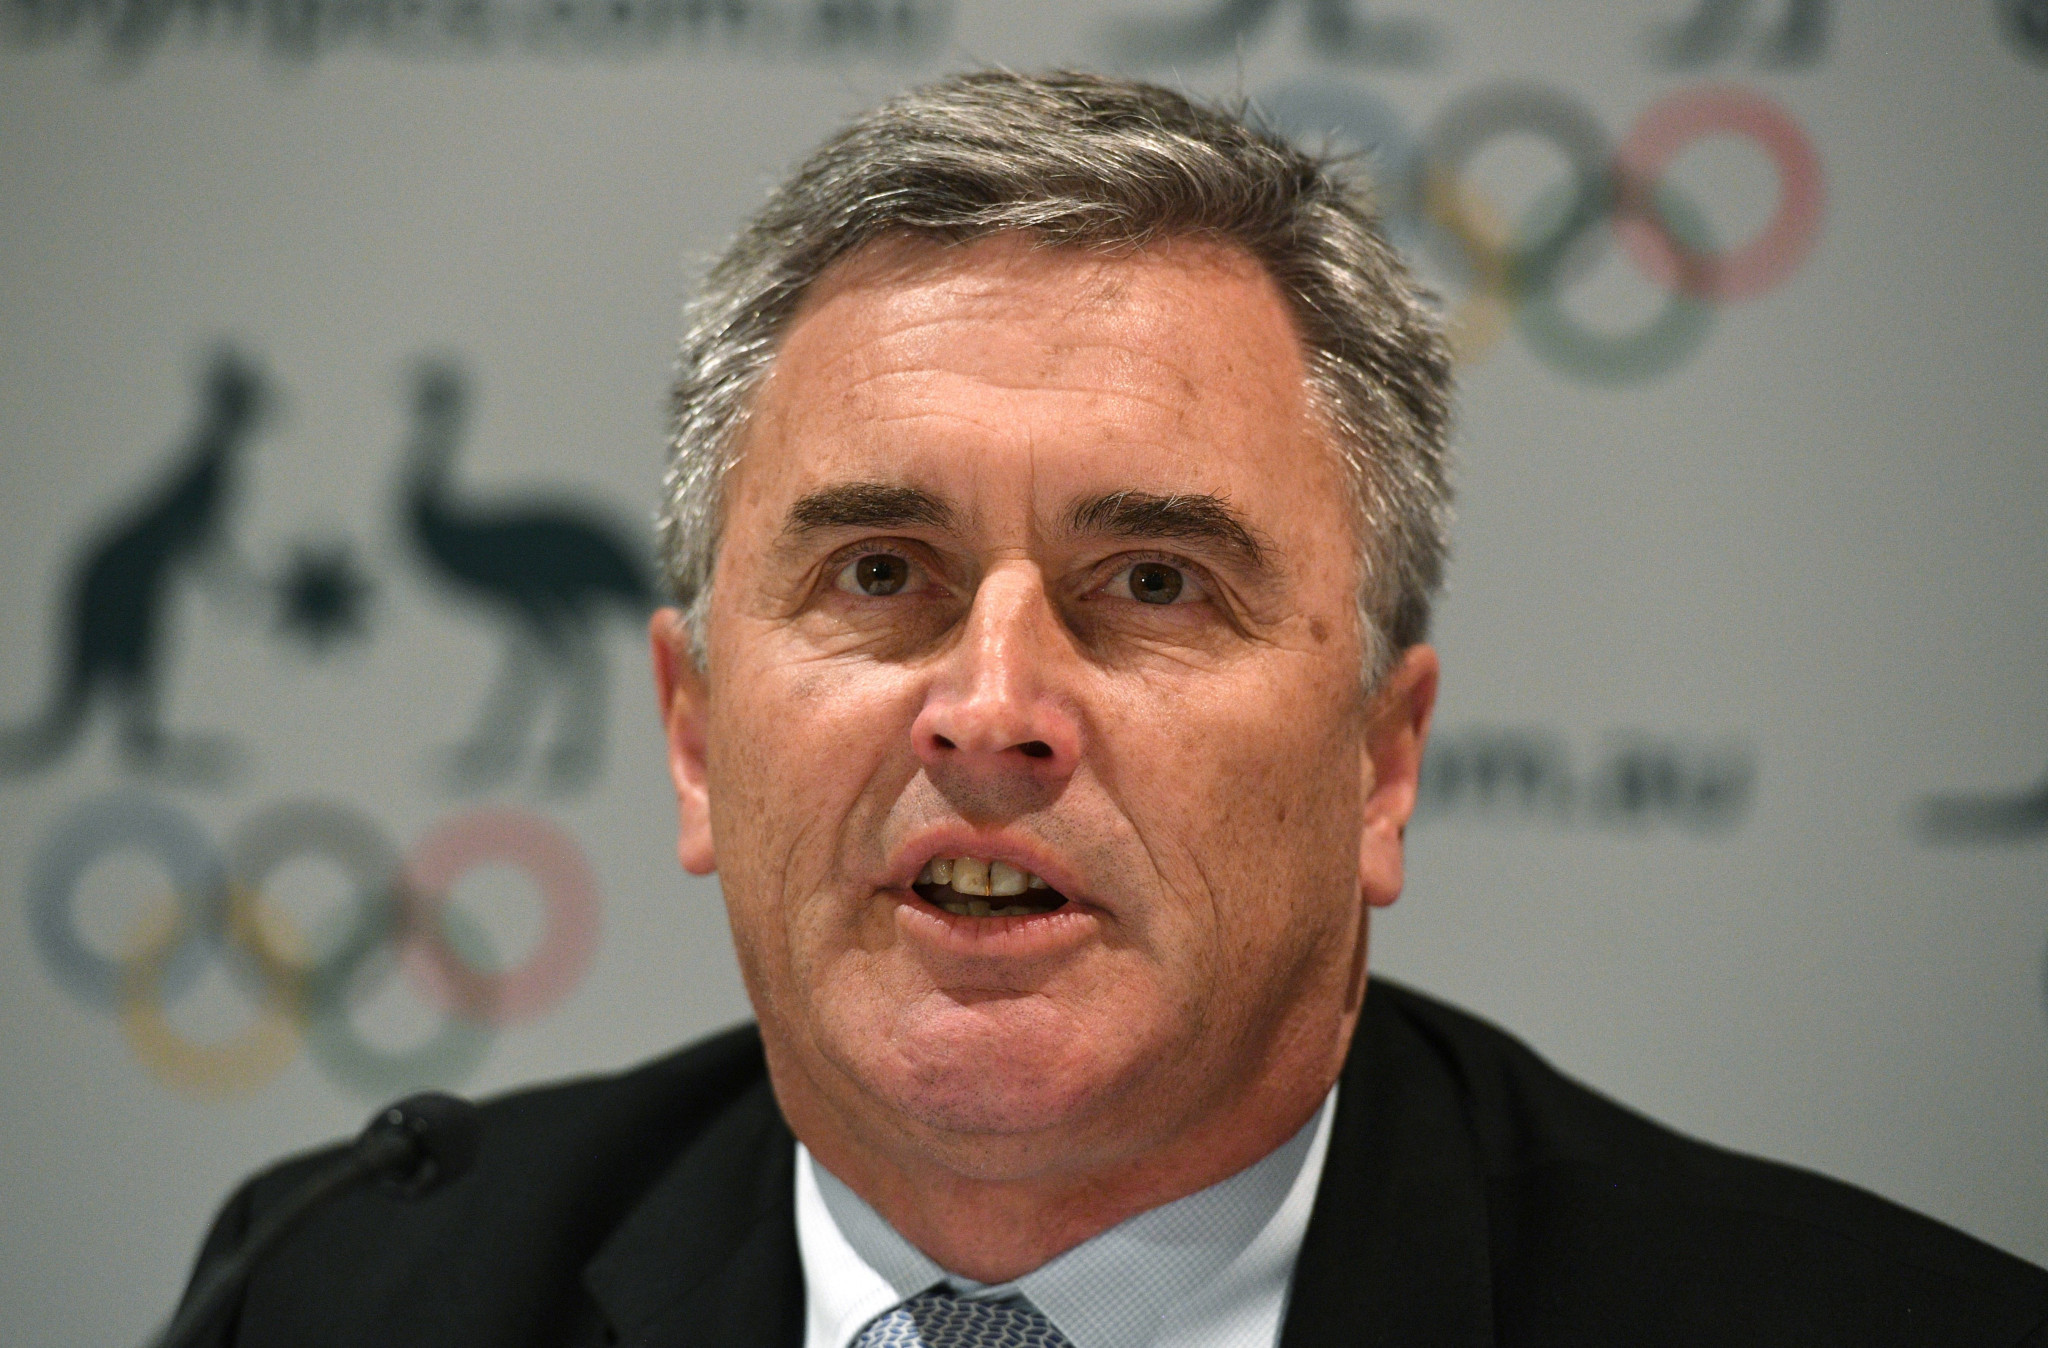 Australia's Chef de Mission Ian Chesterman is satisfied with the steps the International Olympic Committee and Pyeongchang 2018 are taking to ensure security ©Getty Images